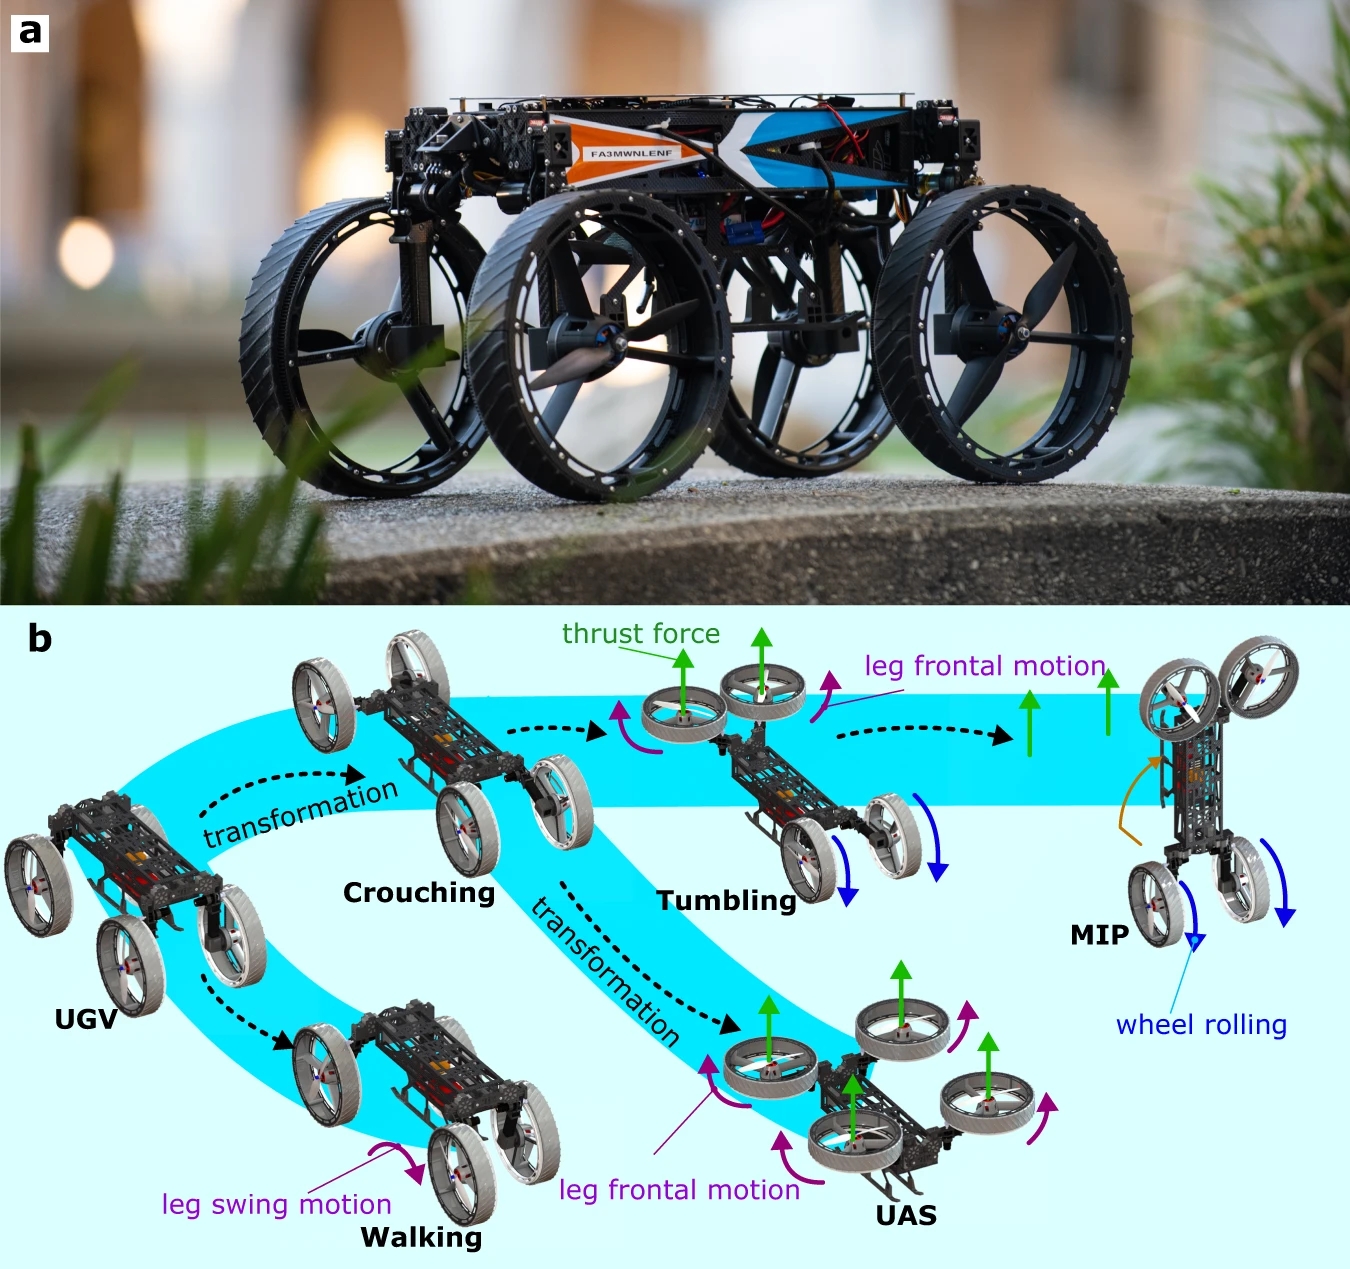 The M4 robot transforms to roll, fly and walk across various terrains